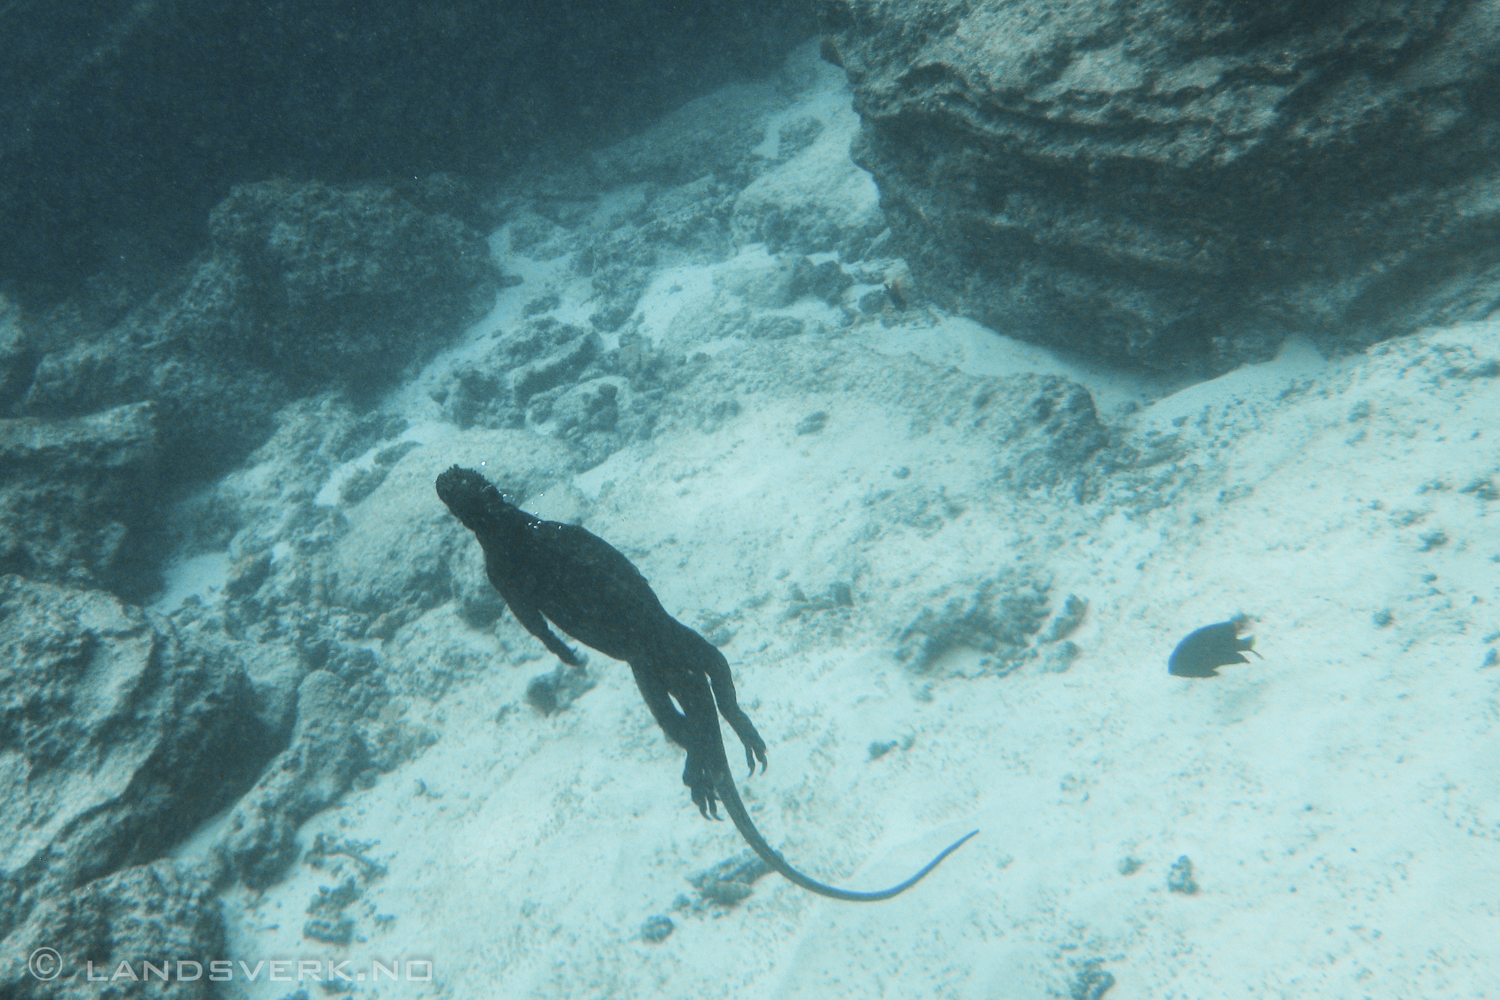 Marine Iguana, Sombrero Chino, Galapagos. Actually didn't know they could dive, but they we're extremely fast underwater swimmers. 

(Canon IXUS 970IS / DiCaPac WP-310)